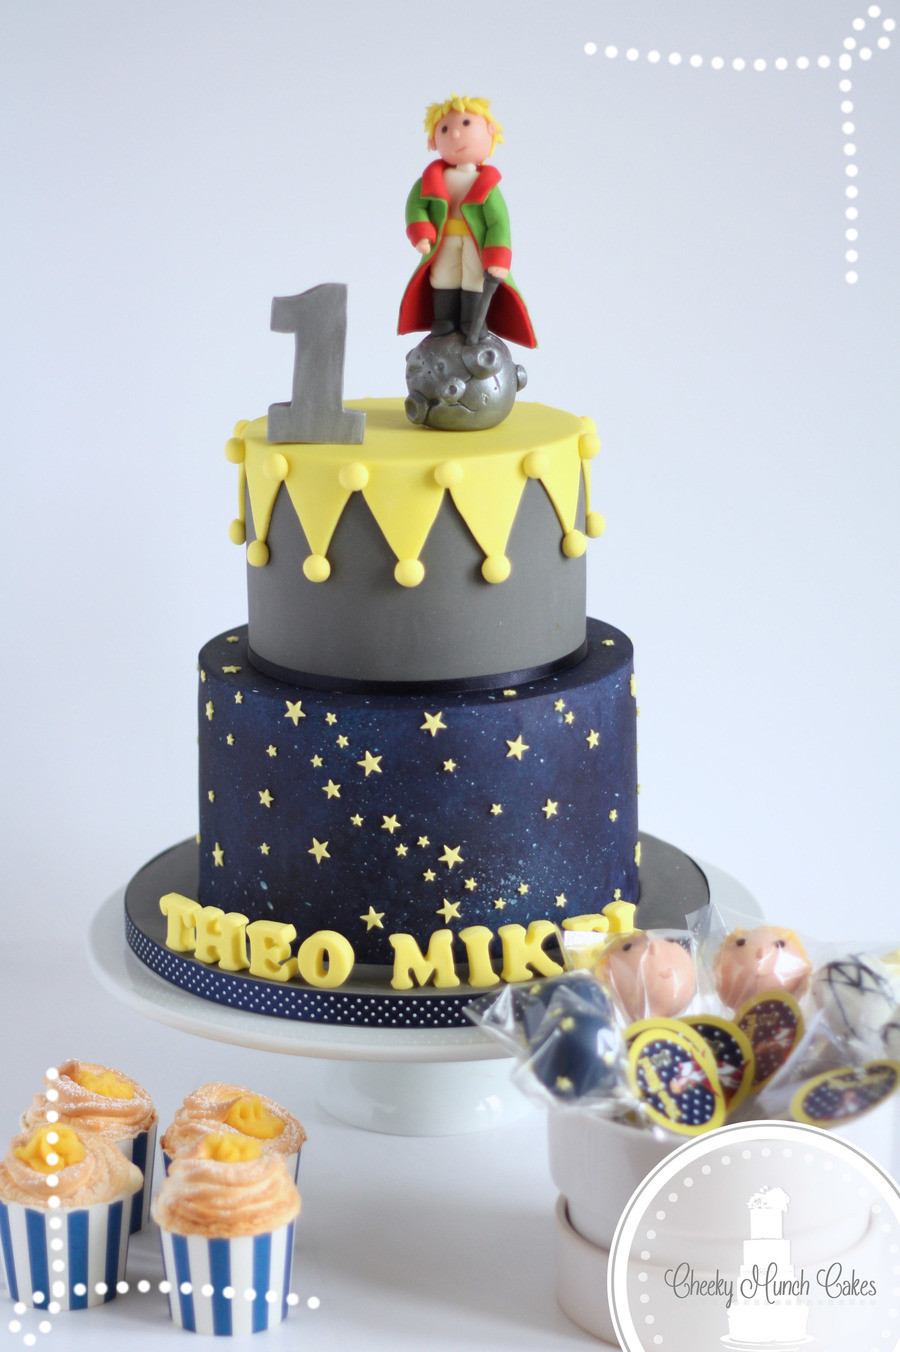 Prince Birthday Cake
 The Little Prince Cake CakeCentral